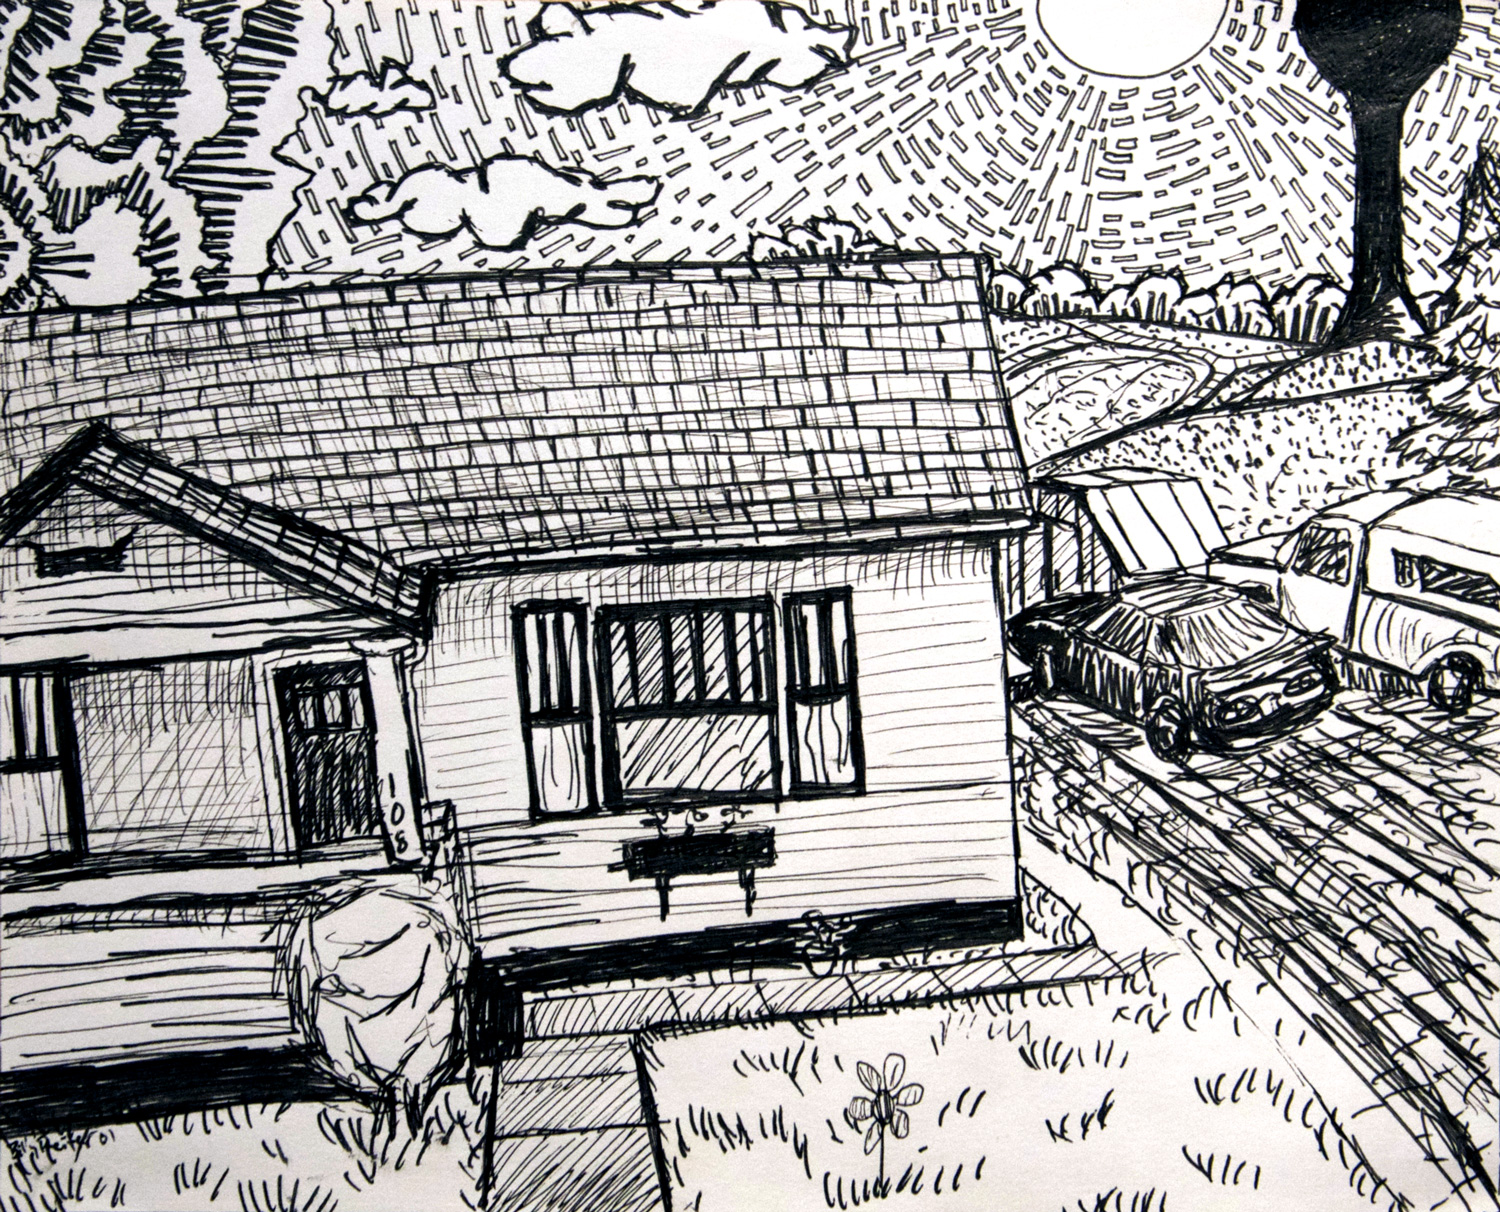 Tara's House - Summer drawing, by Billy Reiter